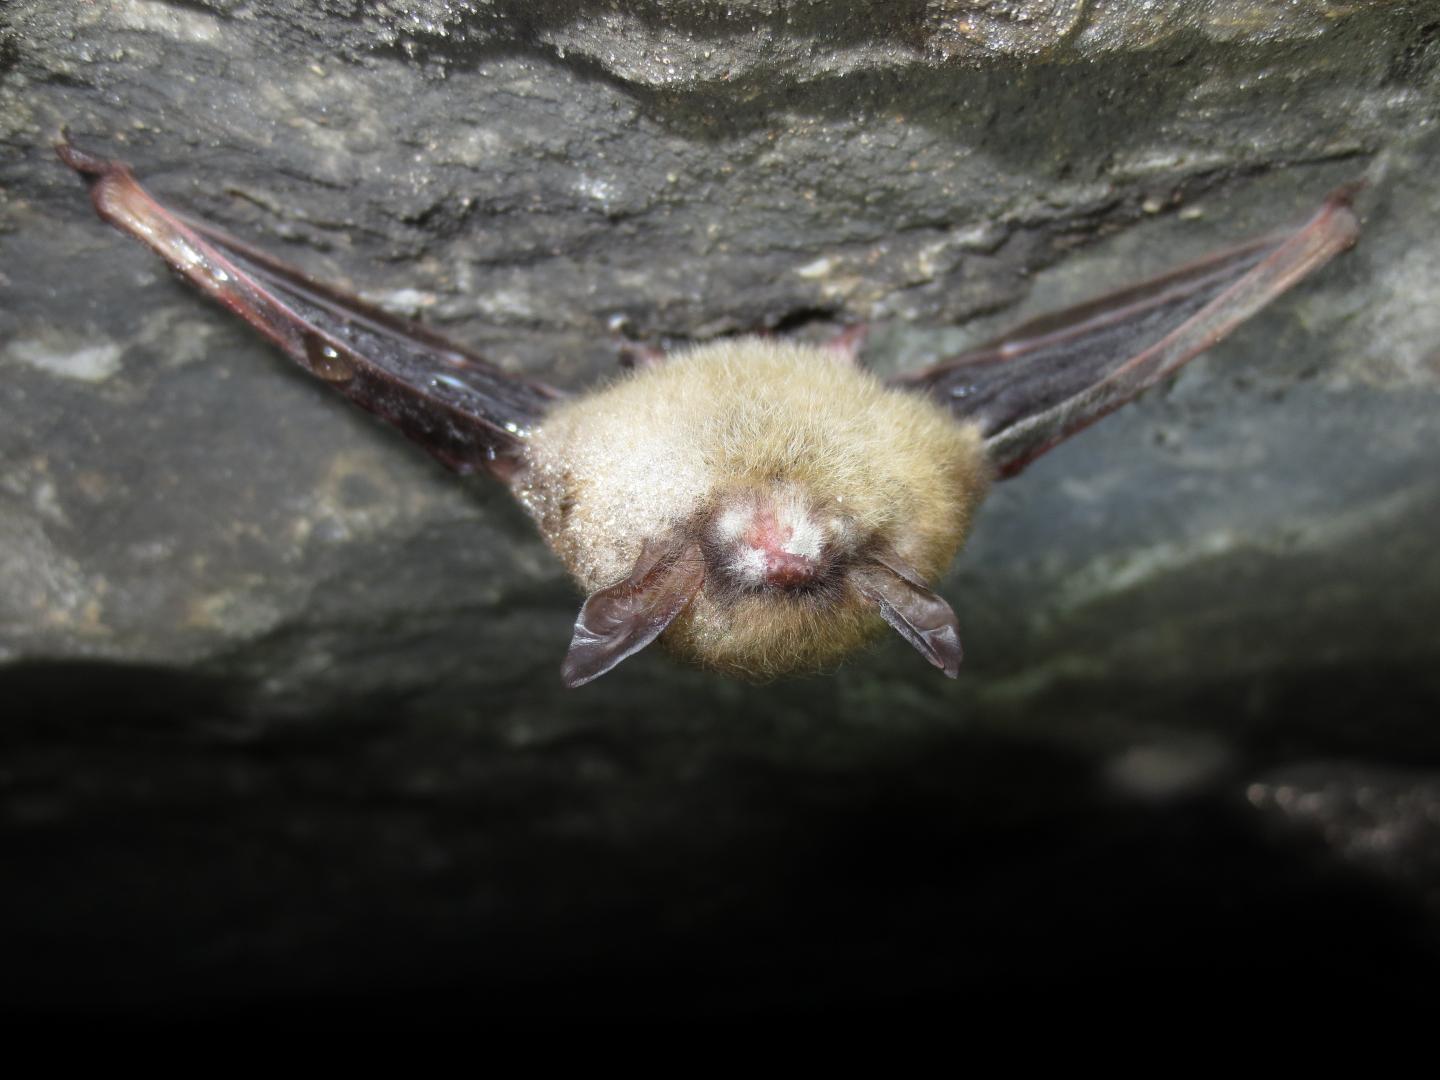 Northern Long-Eared Bat with Infection